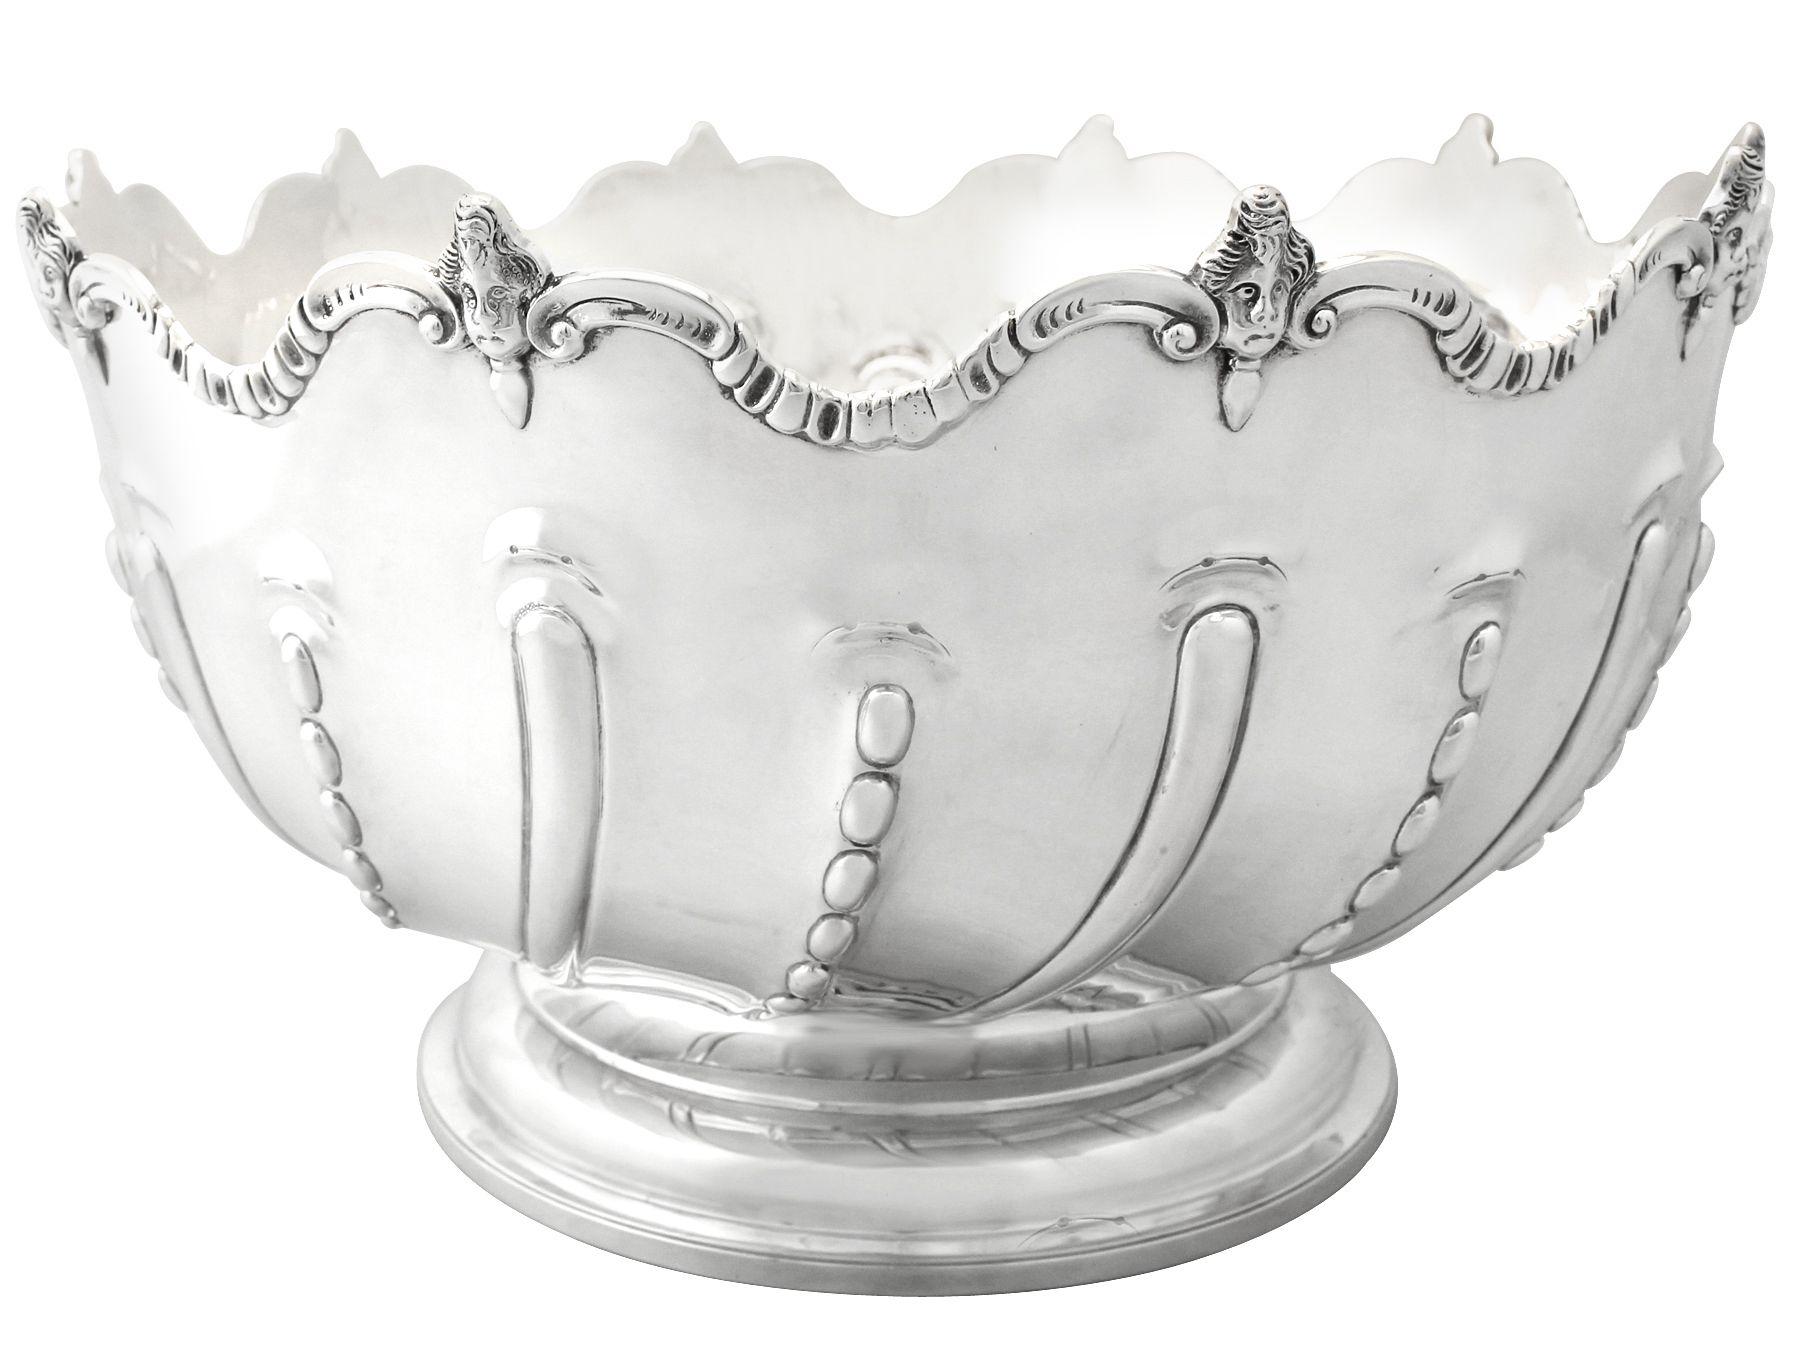 A magnificent, fine and impressive, large antique Victorian English sterling silver Monteith style presentation bowl; an addition to our ornamental silverware collection.

This magnificent antique Victorian Monteith style silver bowl, crafted in